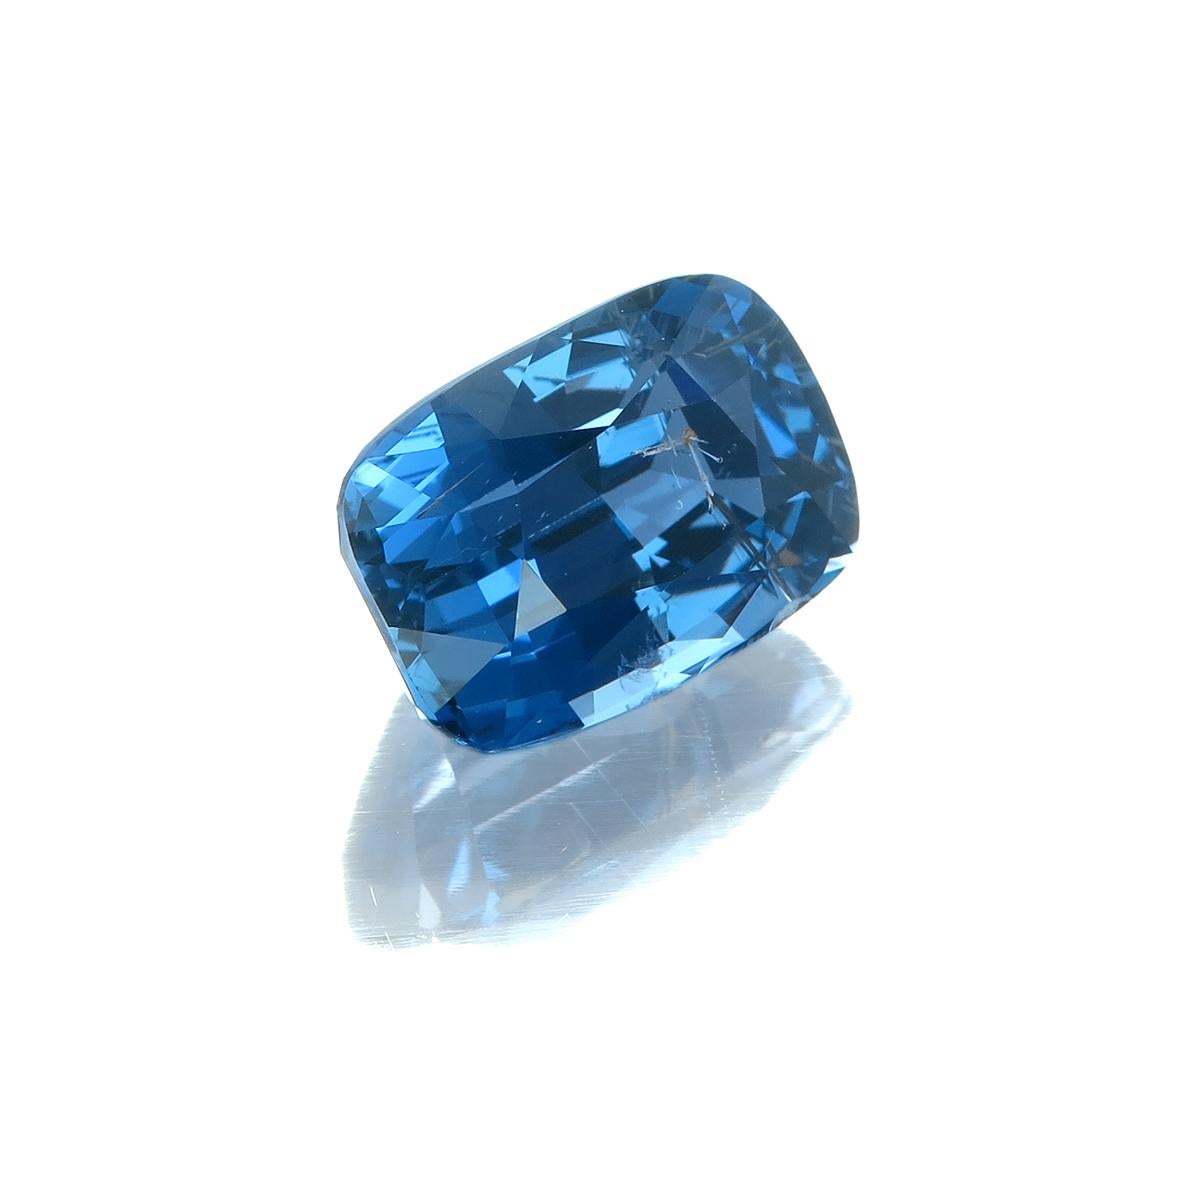 An exquisite and unique natural 5.10 carat blue spinel has a gorgeous blue color and sparkles with lively brilliance. The stone is ideal in cut quality as it has crisp faceting and amazing light return. The color and sparkle combination here is